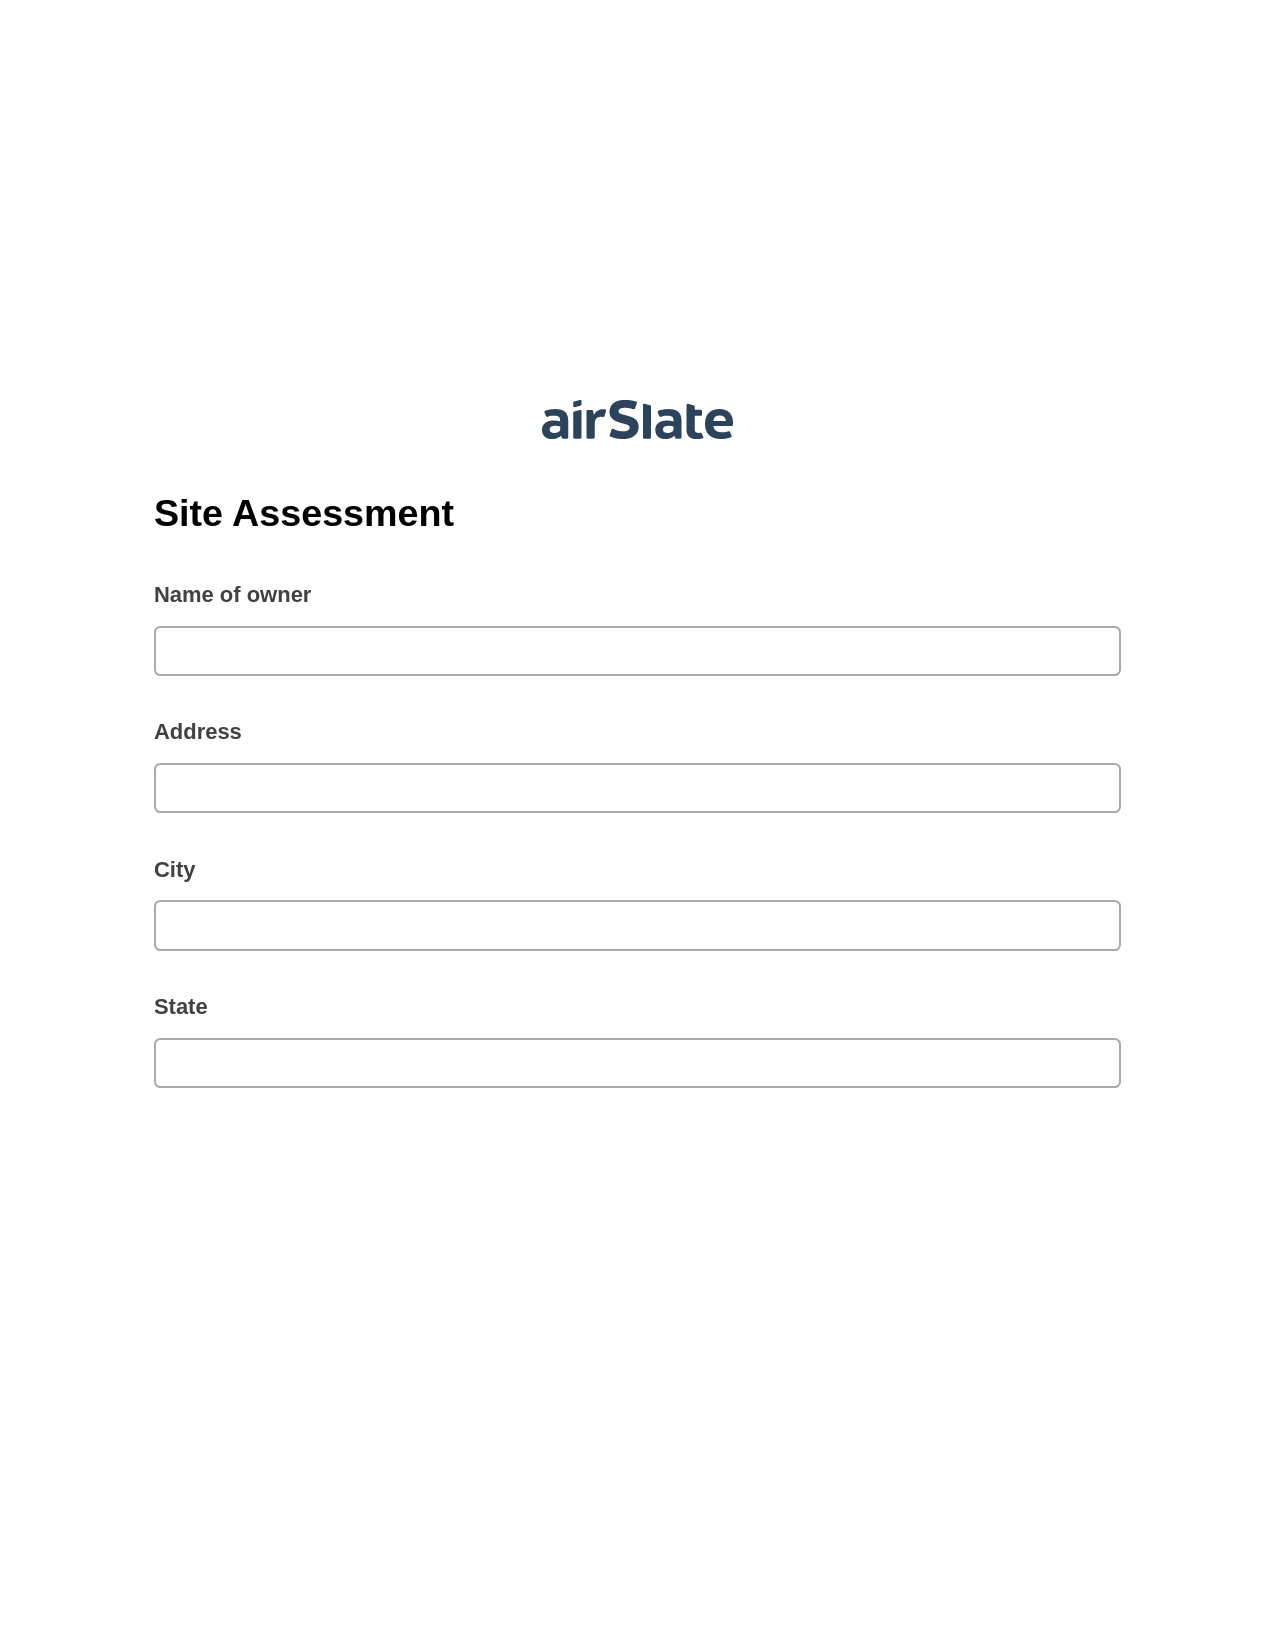 Site Assessment Pre-fill from NetSuite Records Bot, Lock the slate bot, Export to Smartsheet